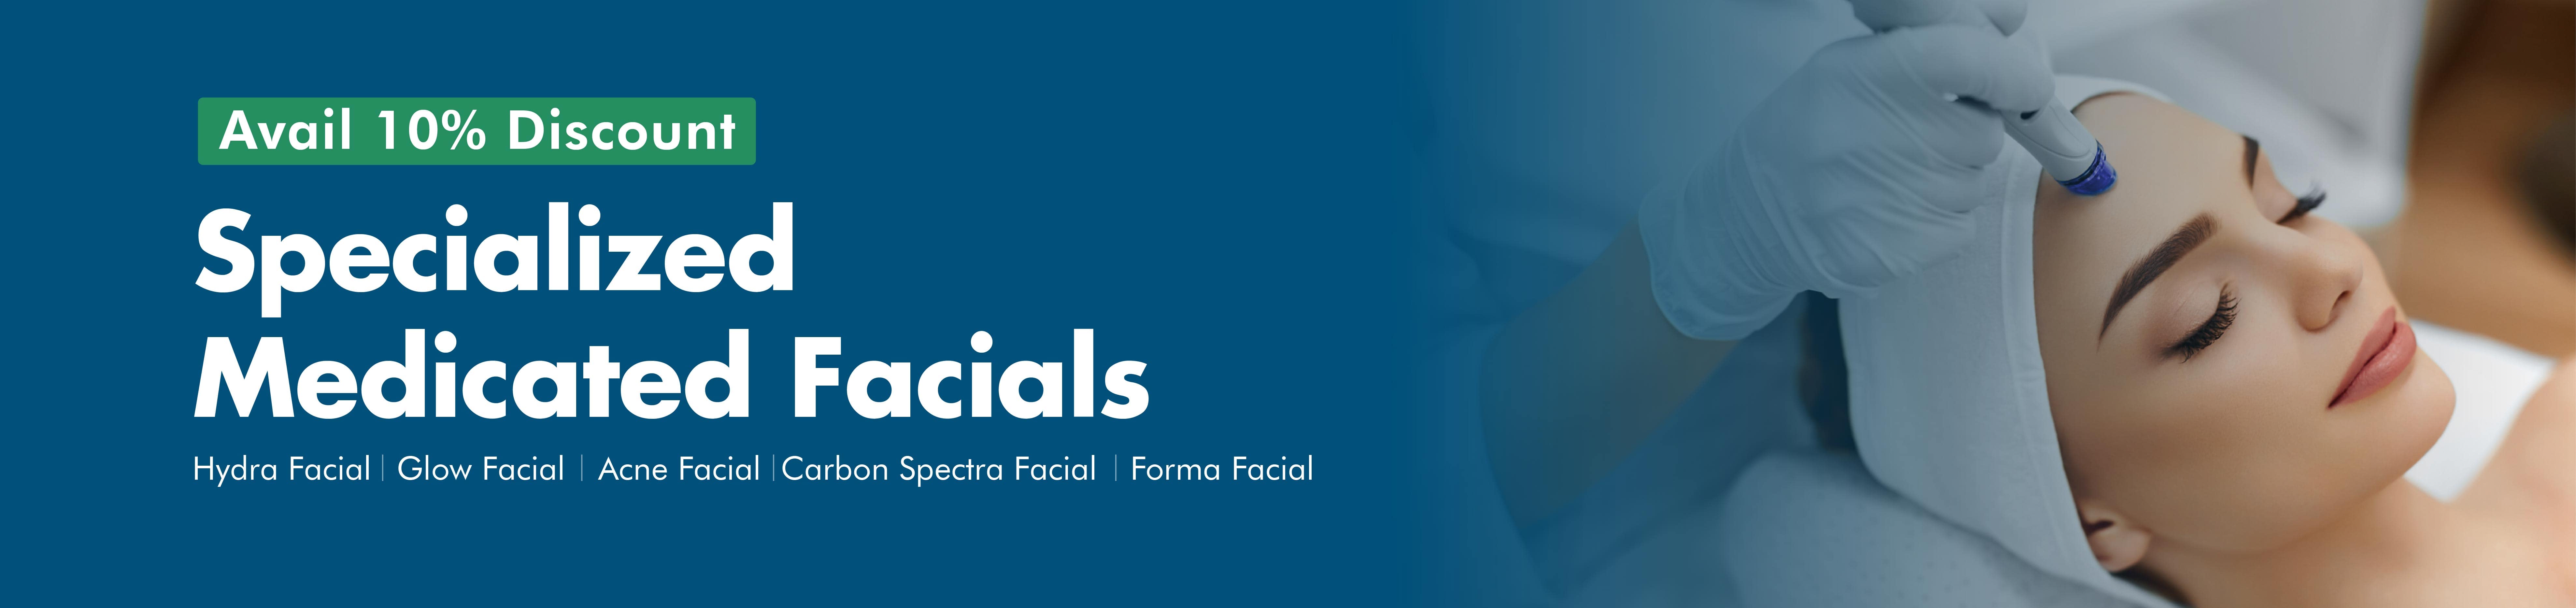 Specialized Medicated Facial